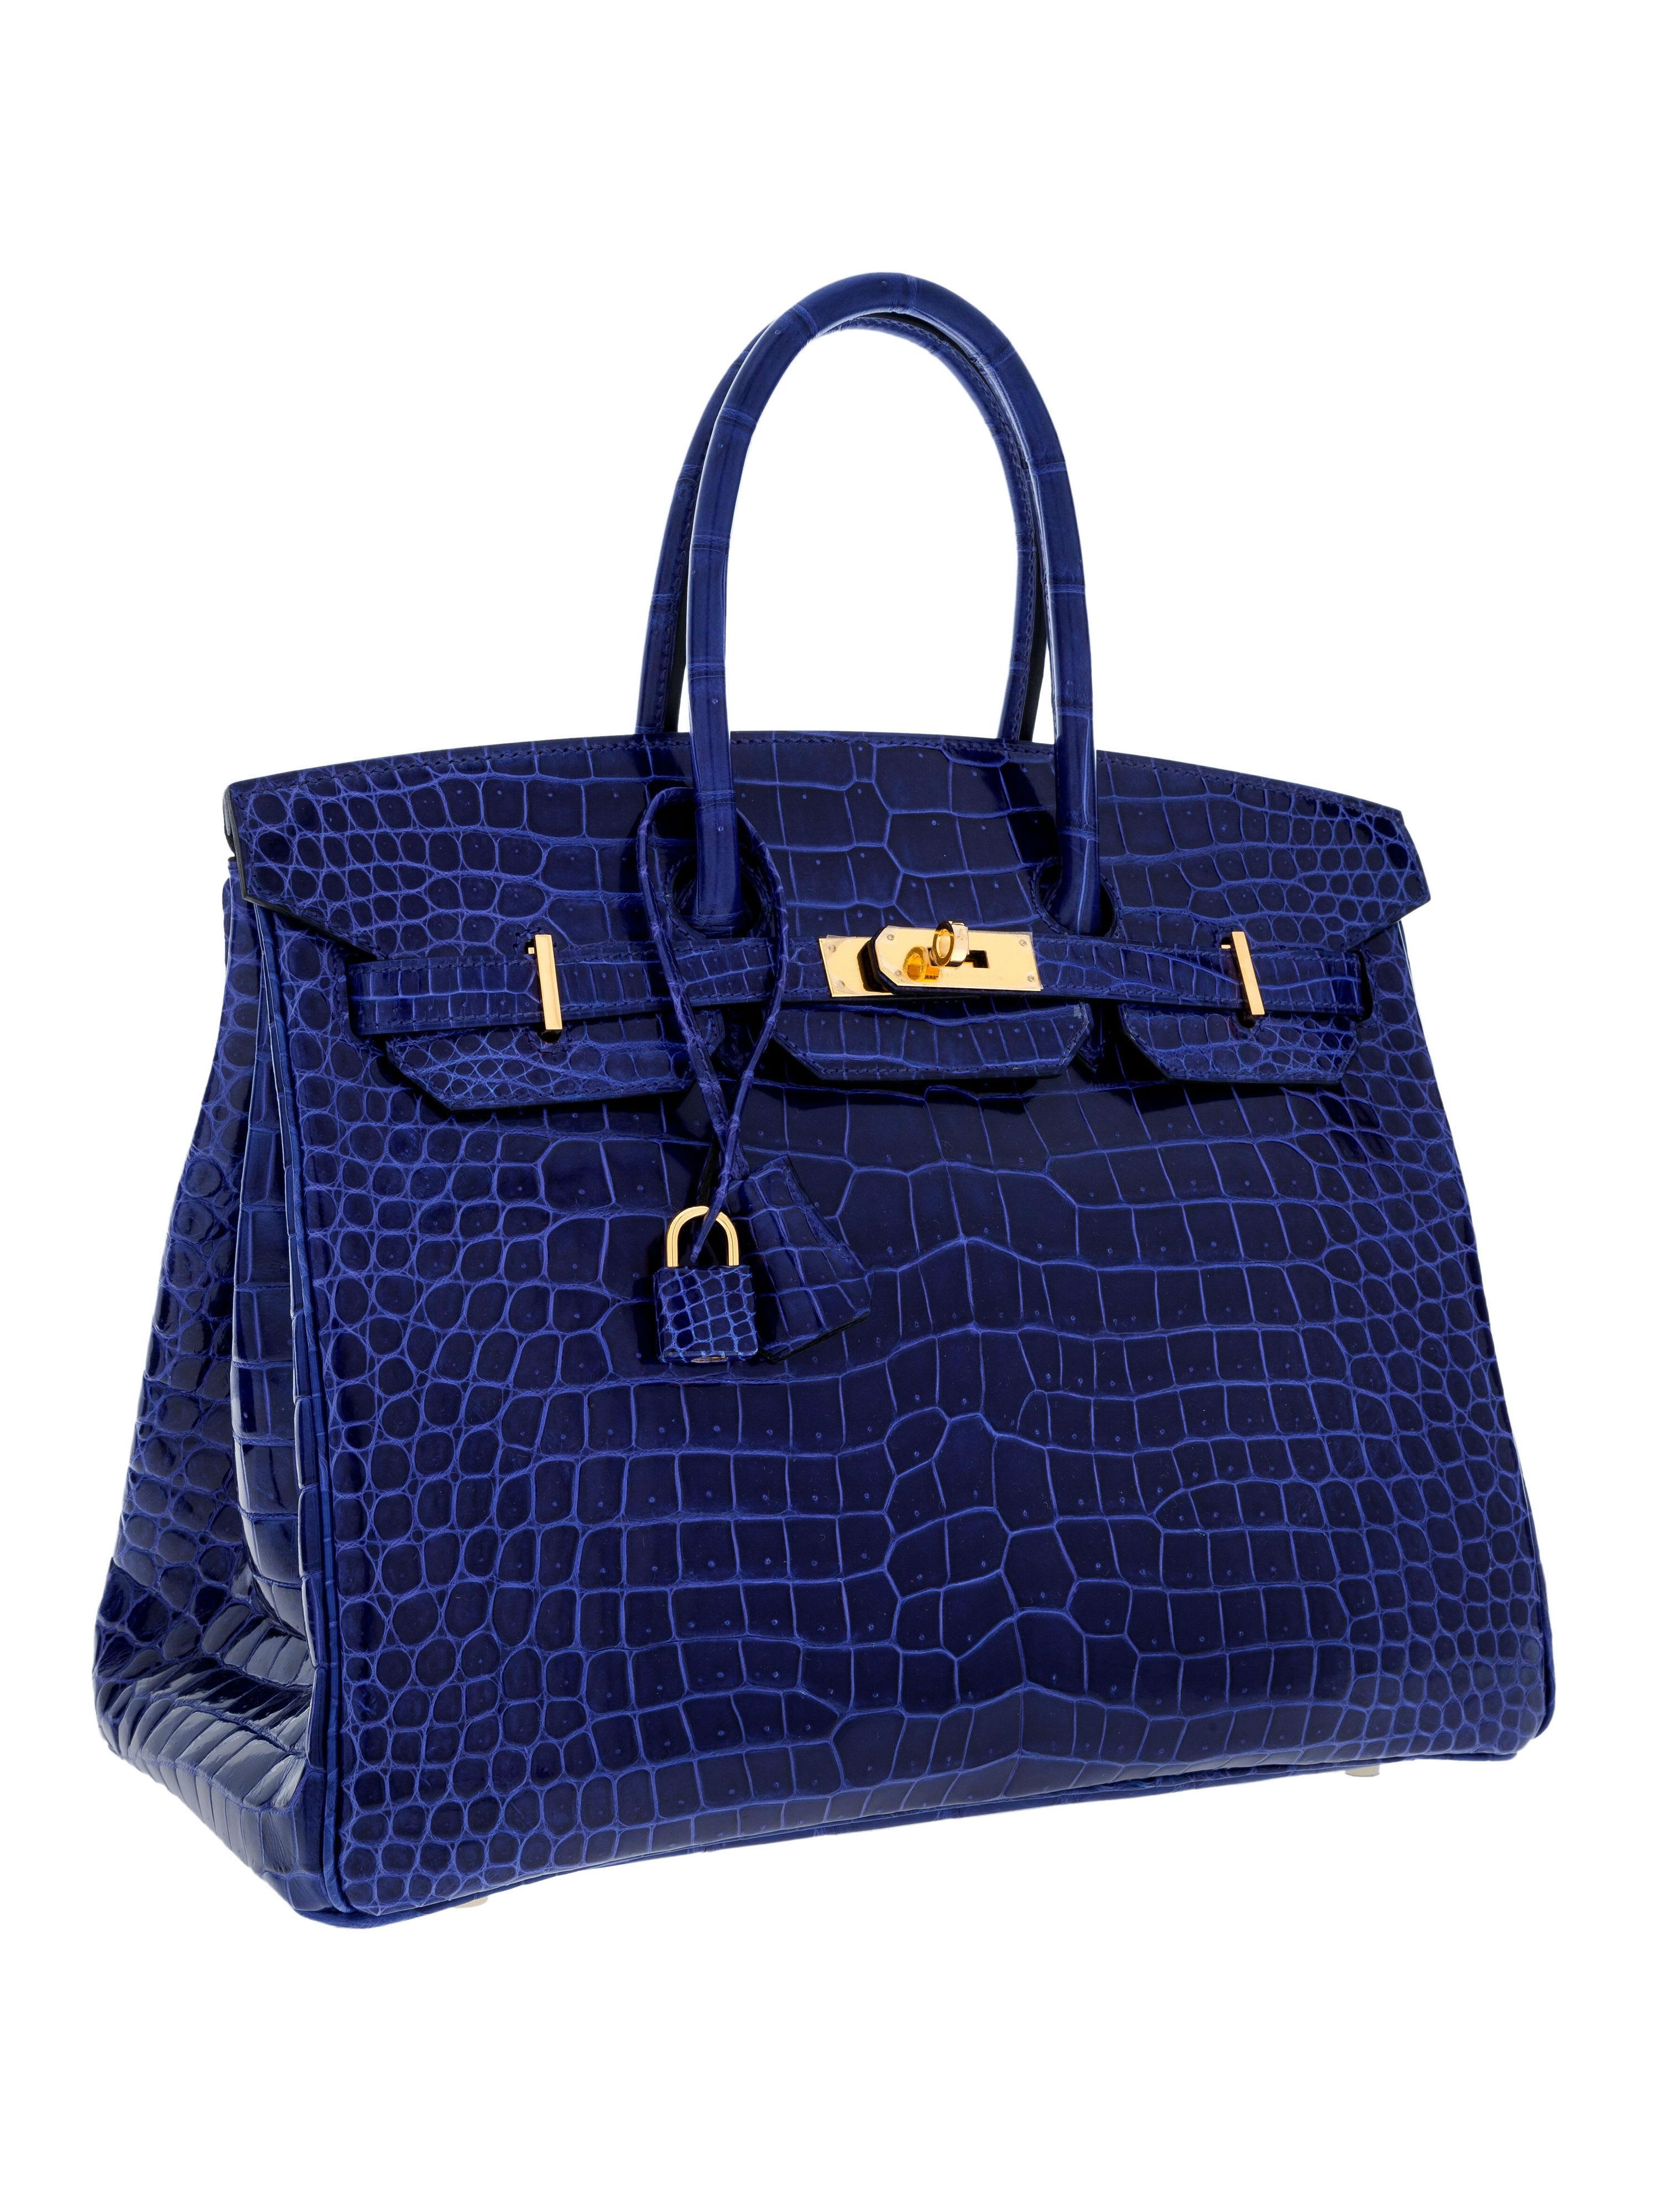 Diamond Birkin bag among rare luxury purses expected to fetch a pretty  penny in Dallas auction